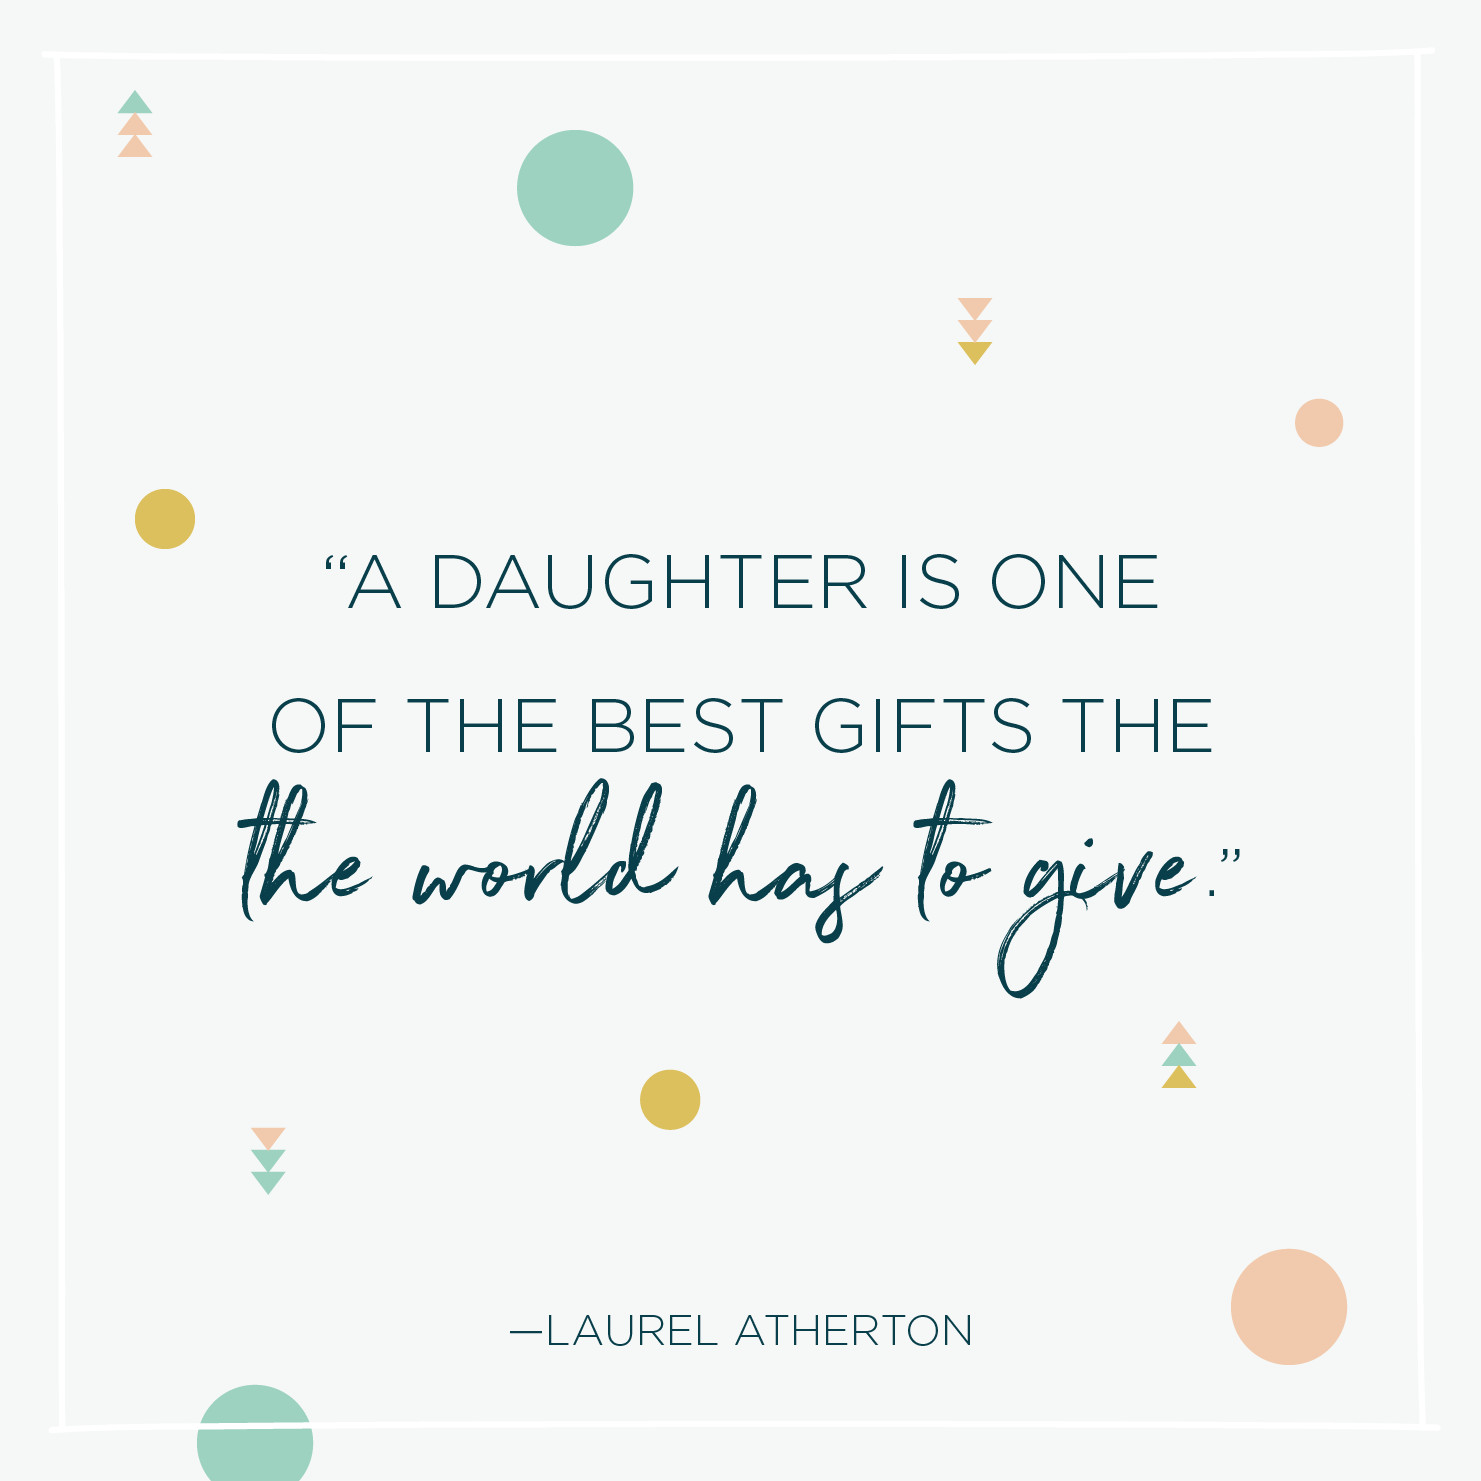 Quotes About My Baby Girl
 84 Inspirational Baby Quotes and Sayings